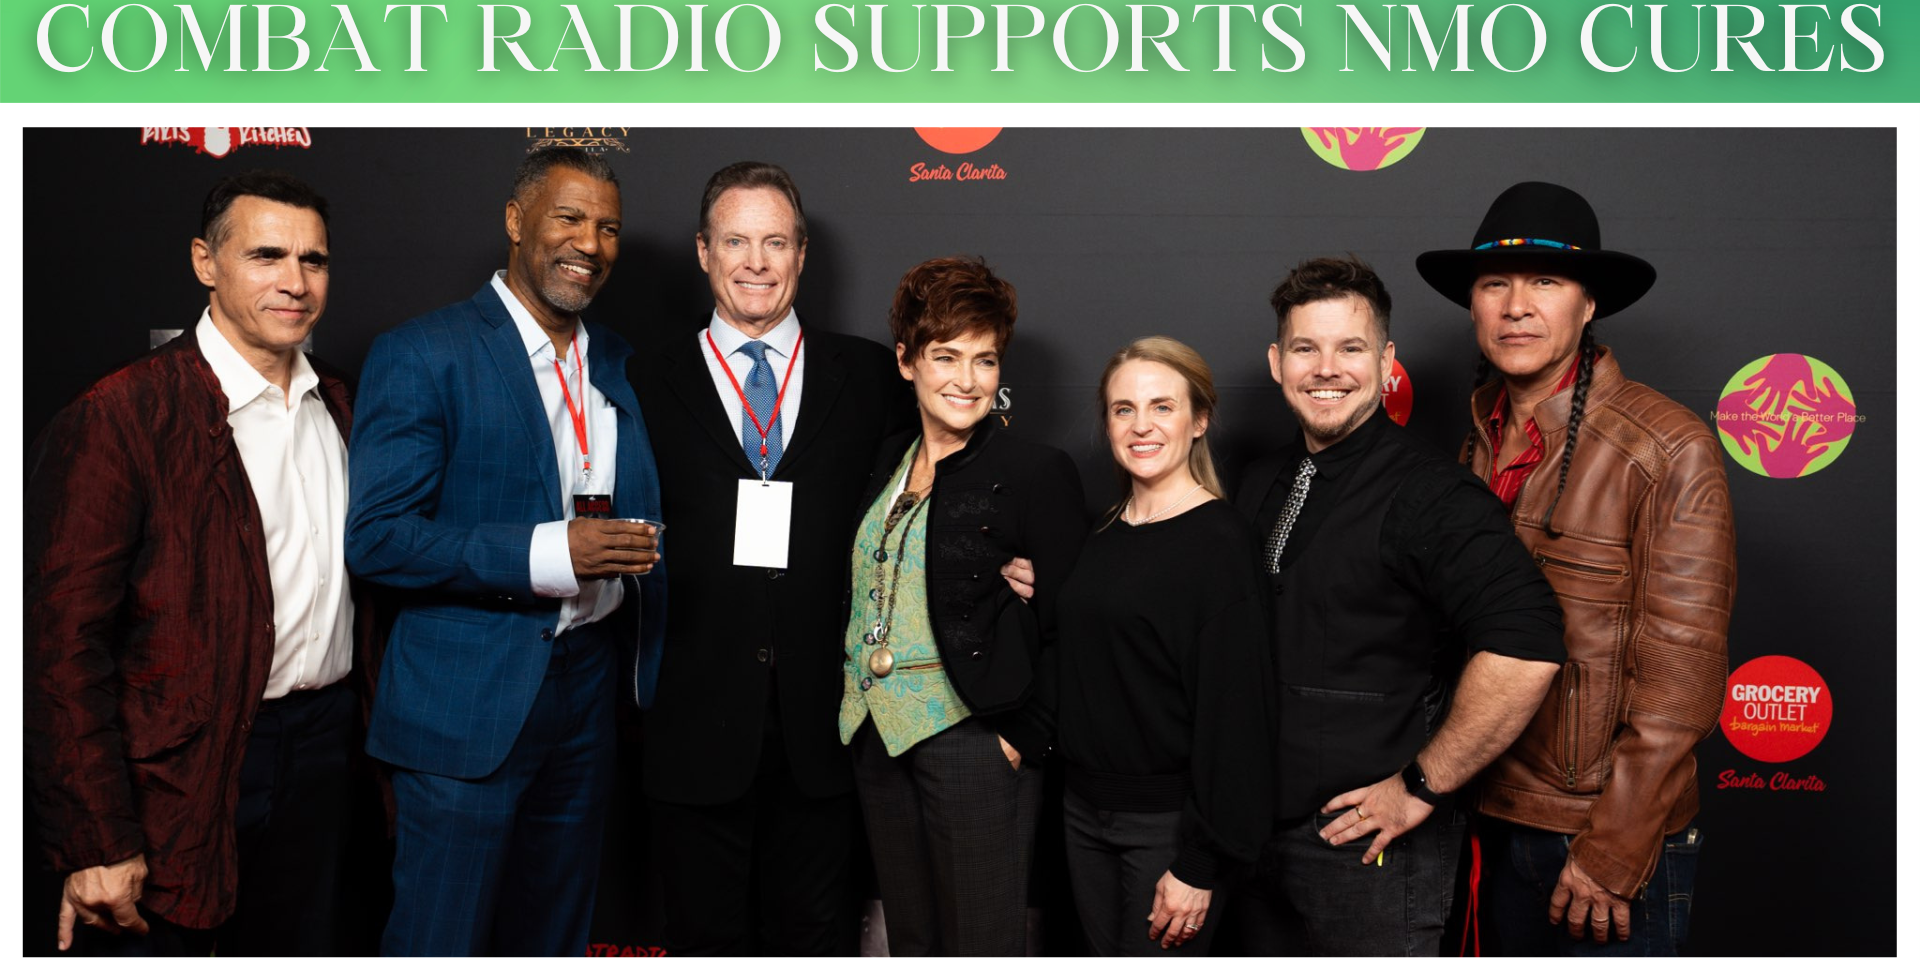 An image that reads "Combat radio supports nmo" with a group of celebrities